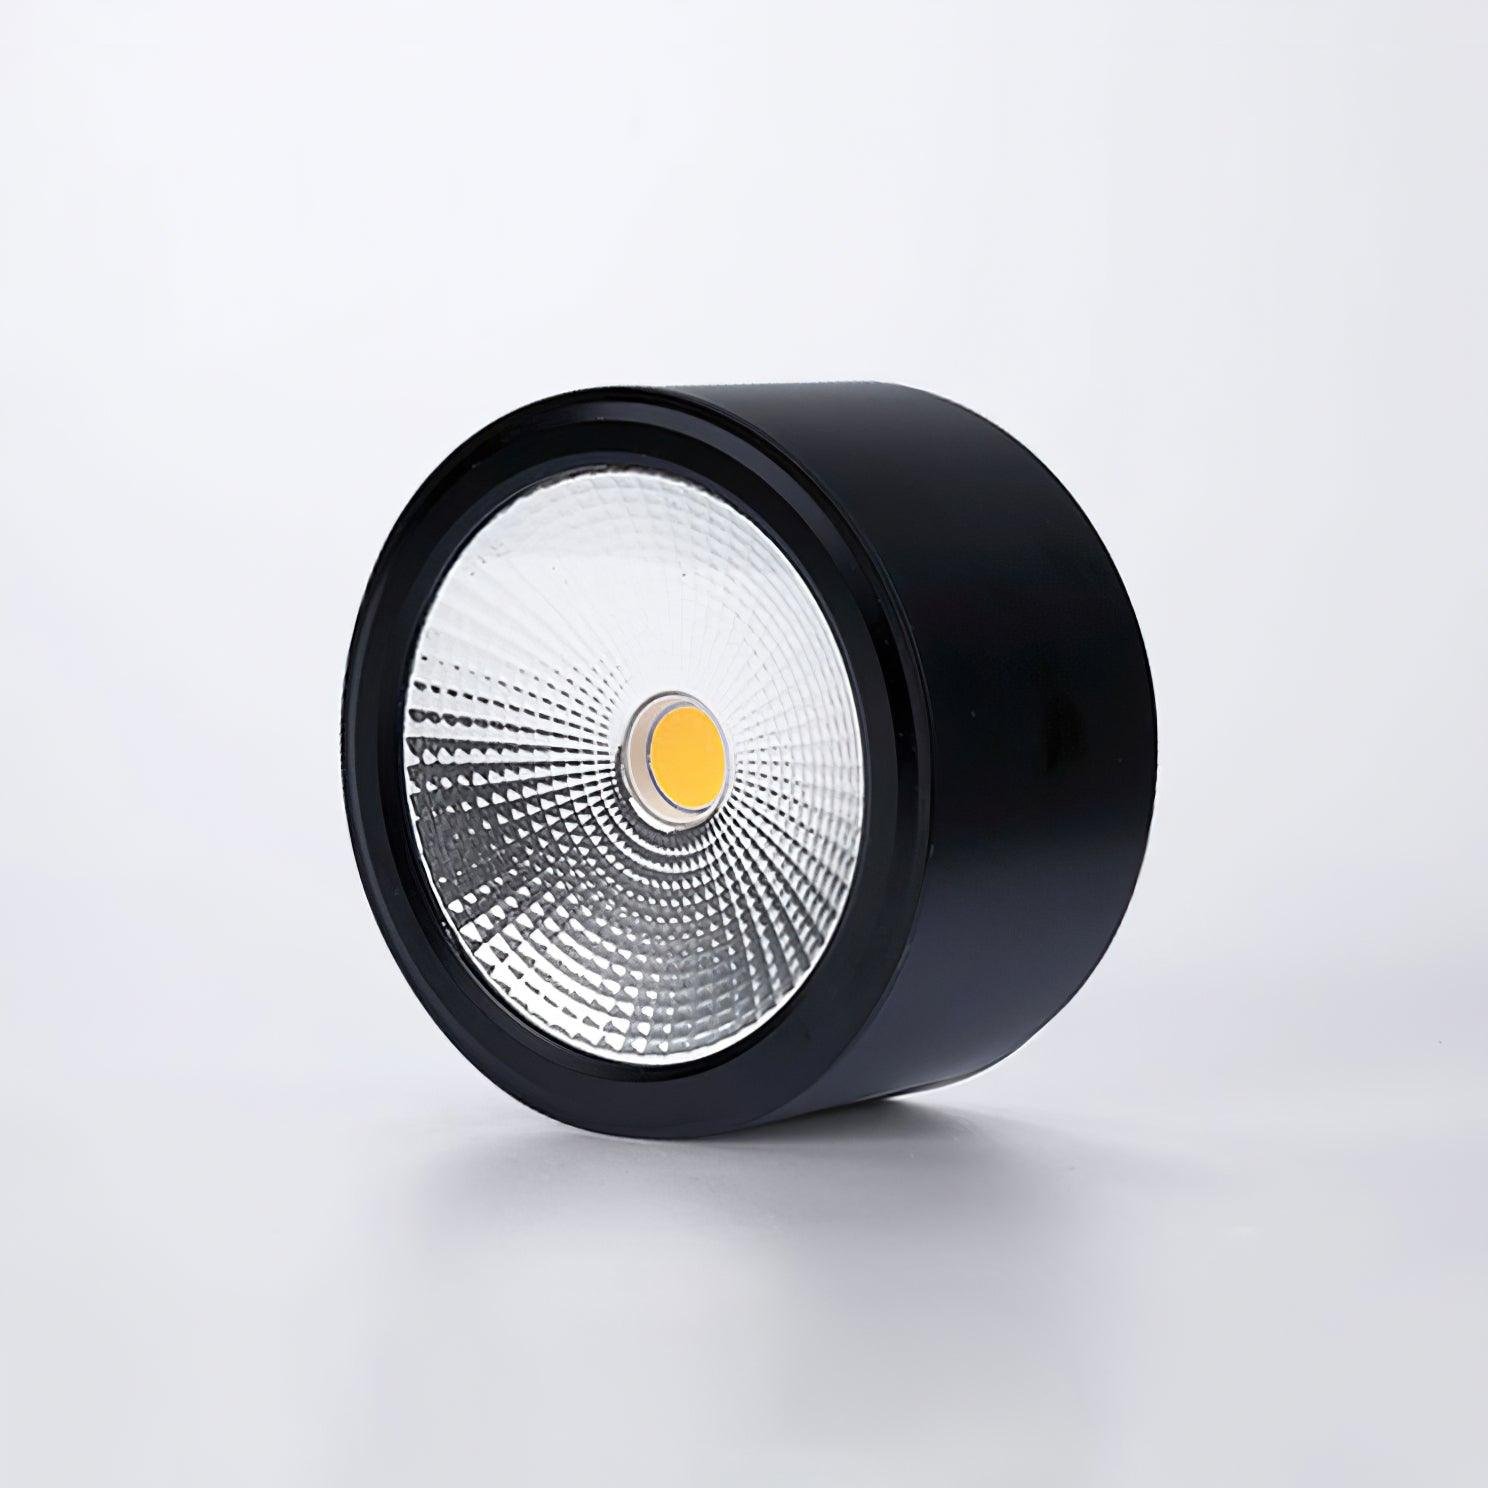 Black Cool Light Anzio Spotlights Set of 10, with a diameter of 3.6 inches and a height of 2 inches.